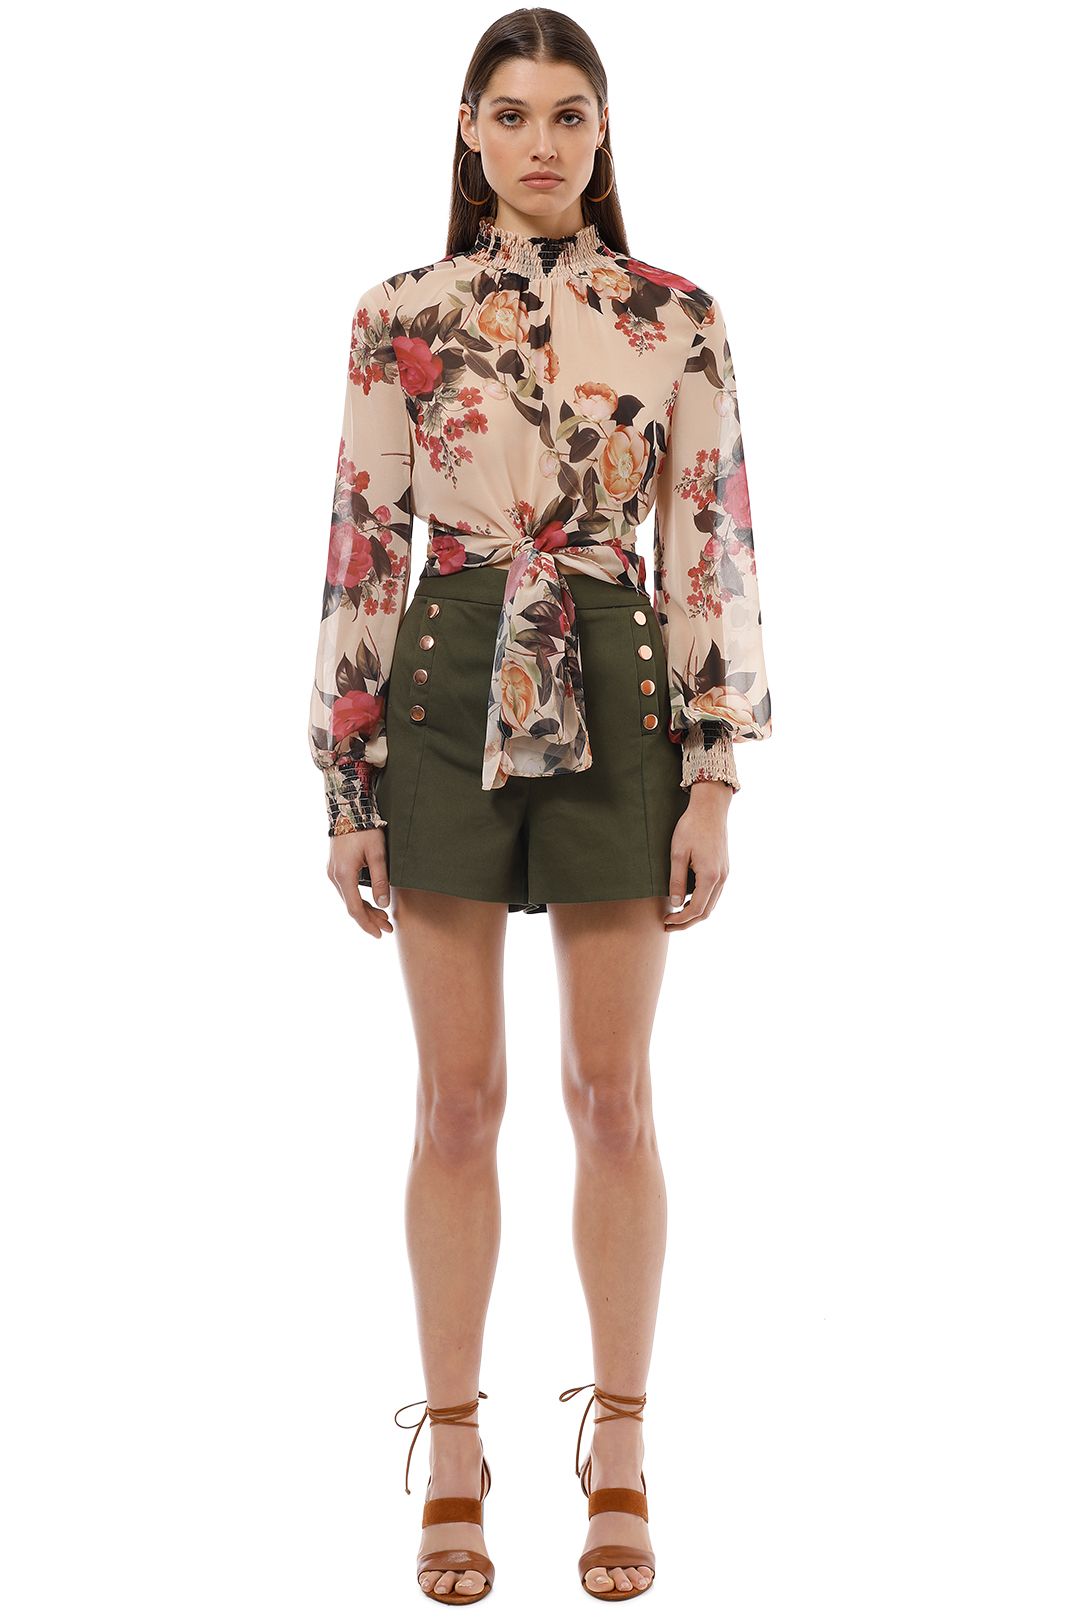 Sheike - Billy Blouse - Cream Floral - Front